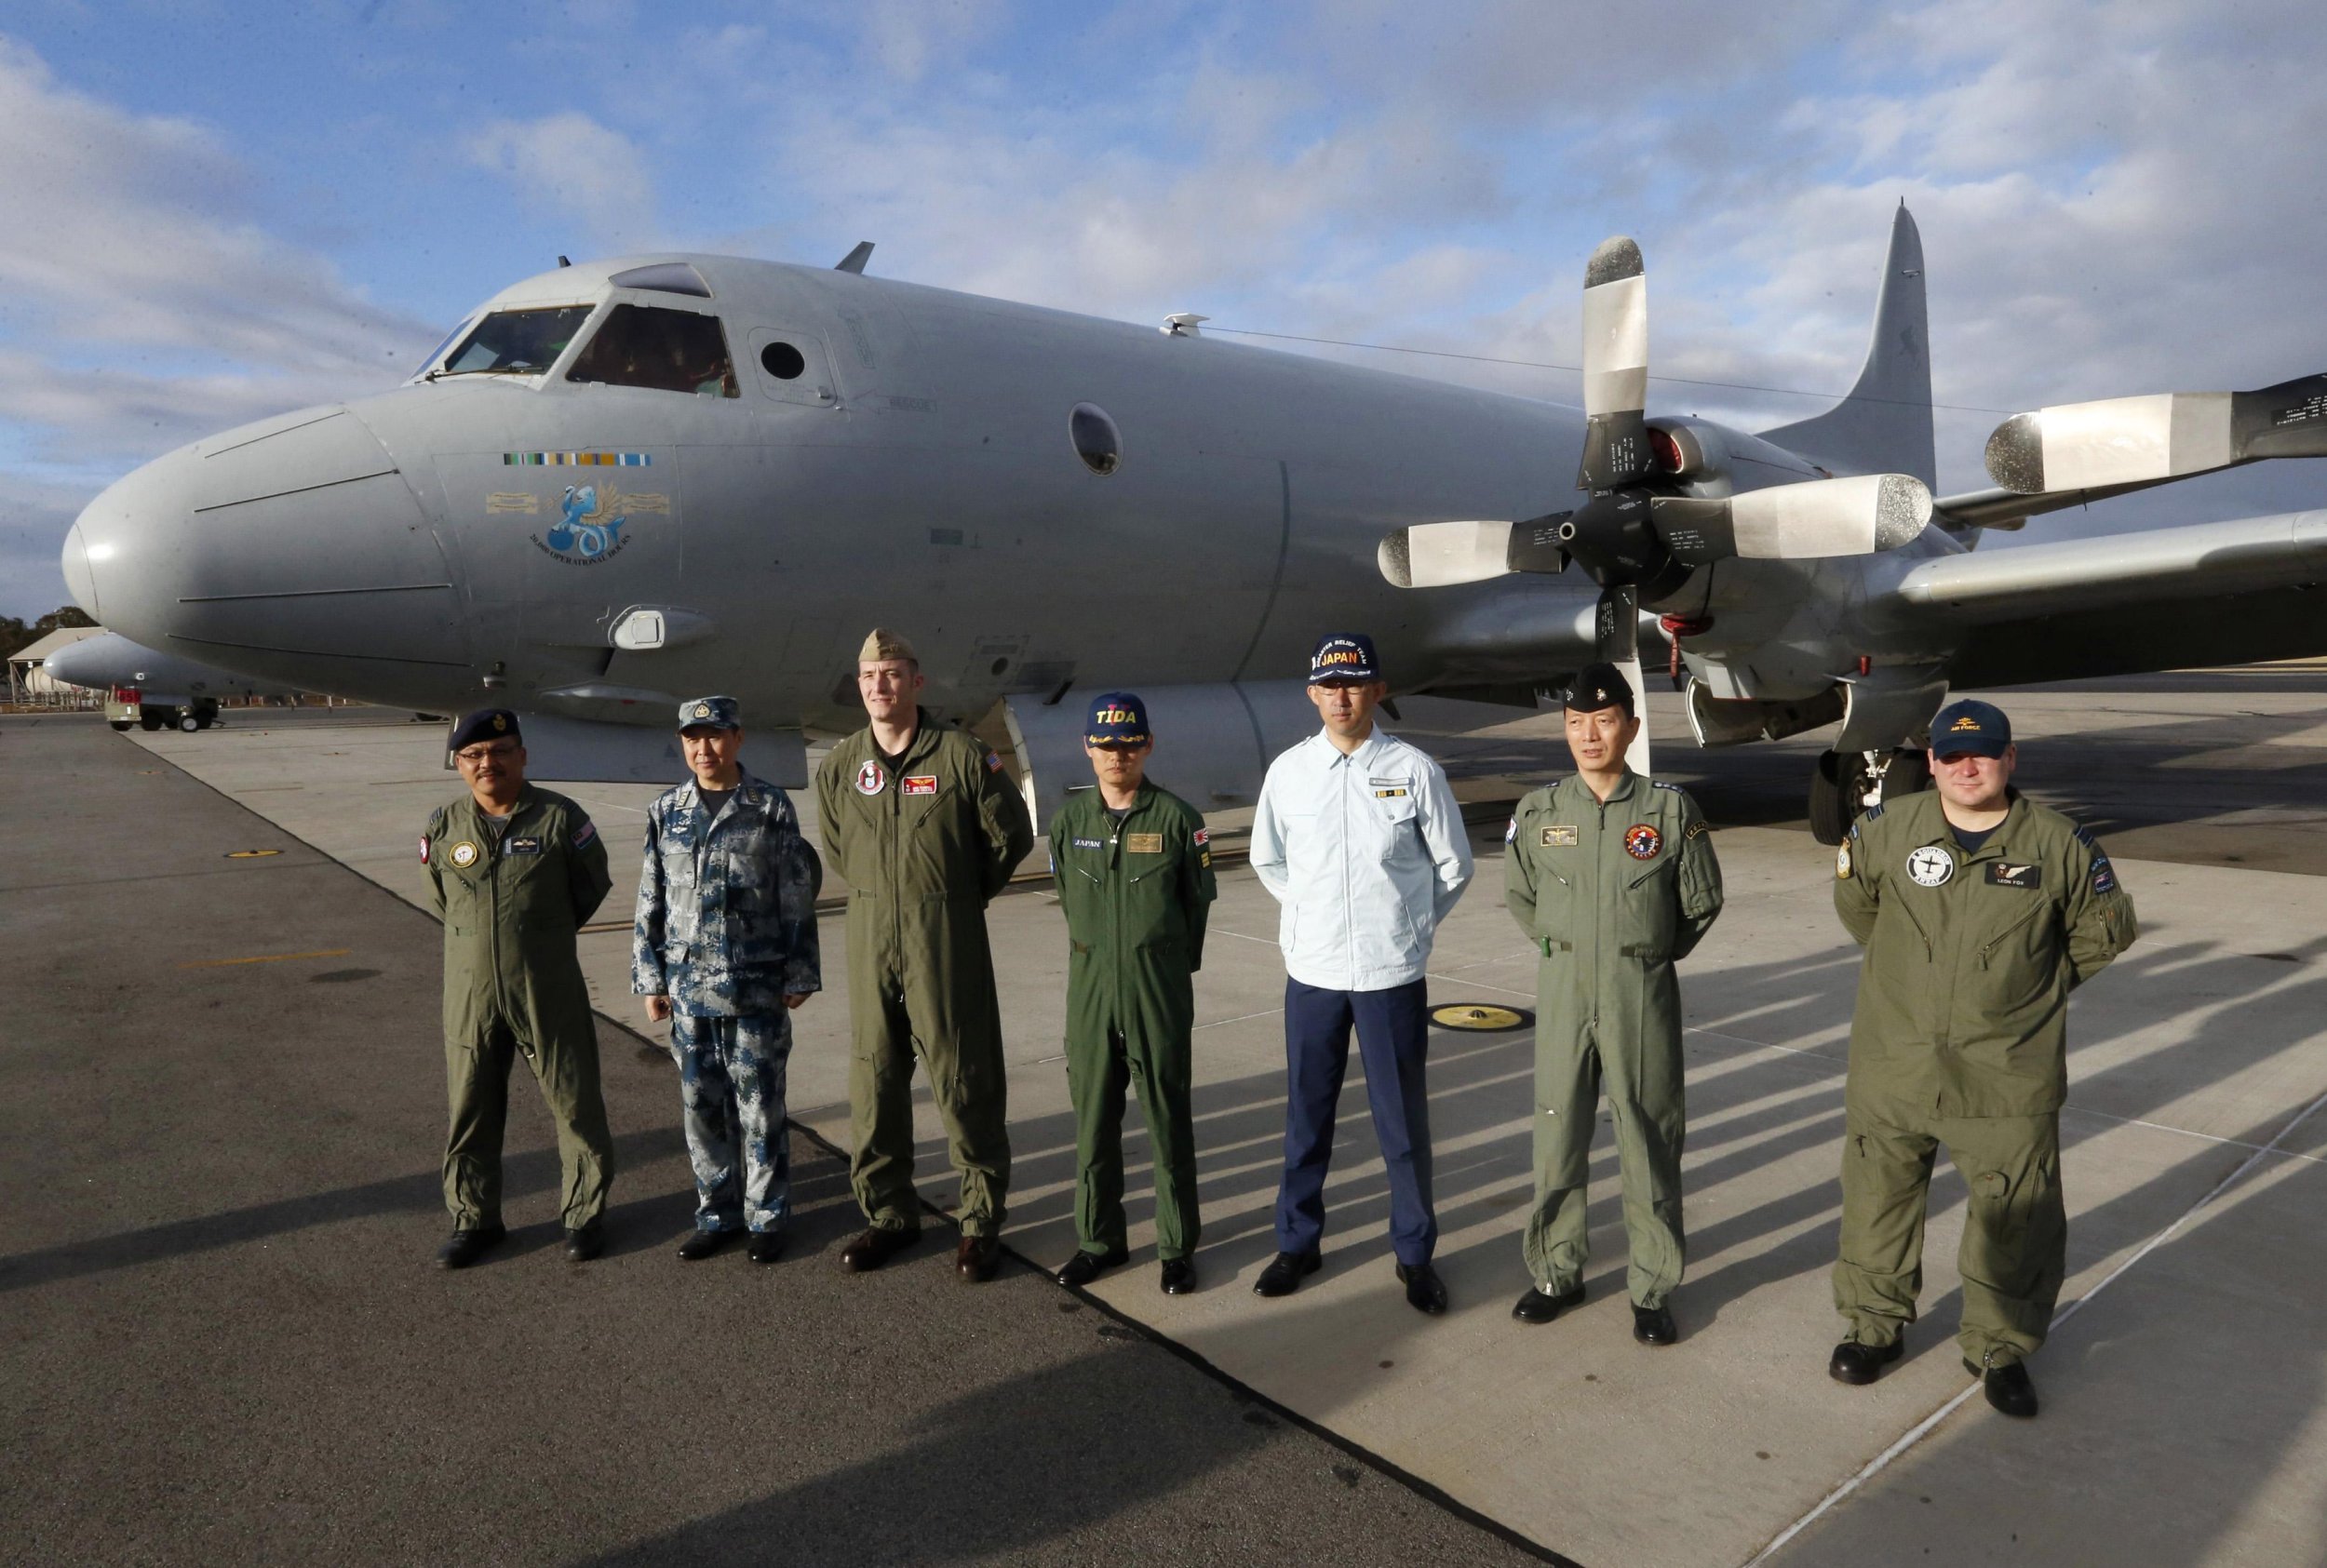 MH370 search team March 30